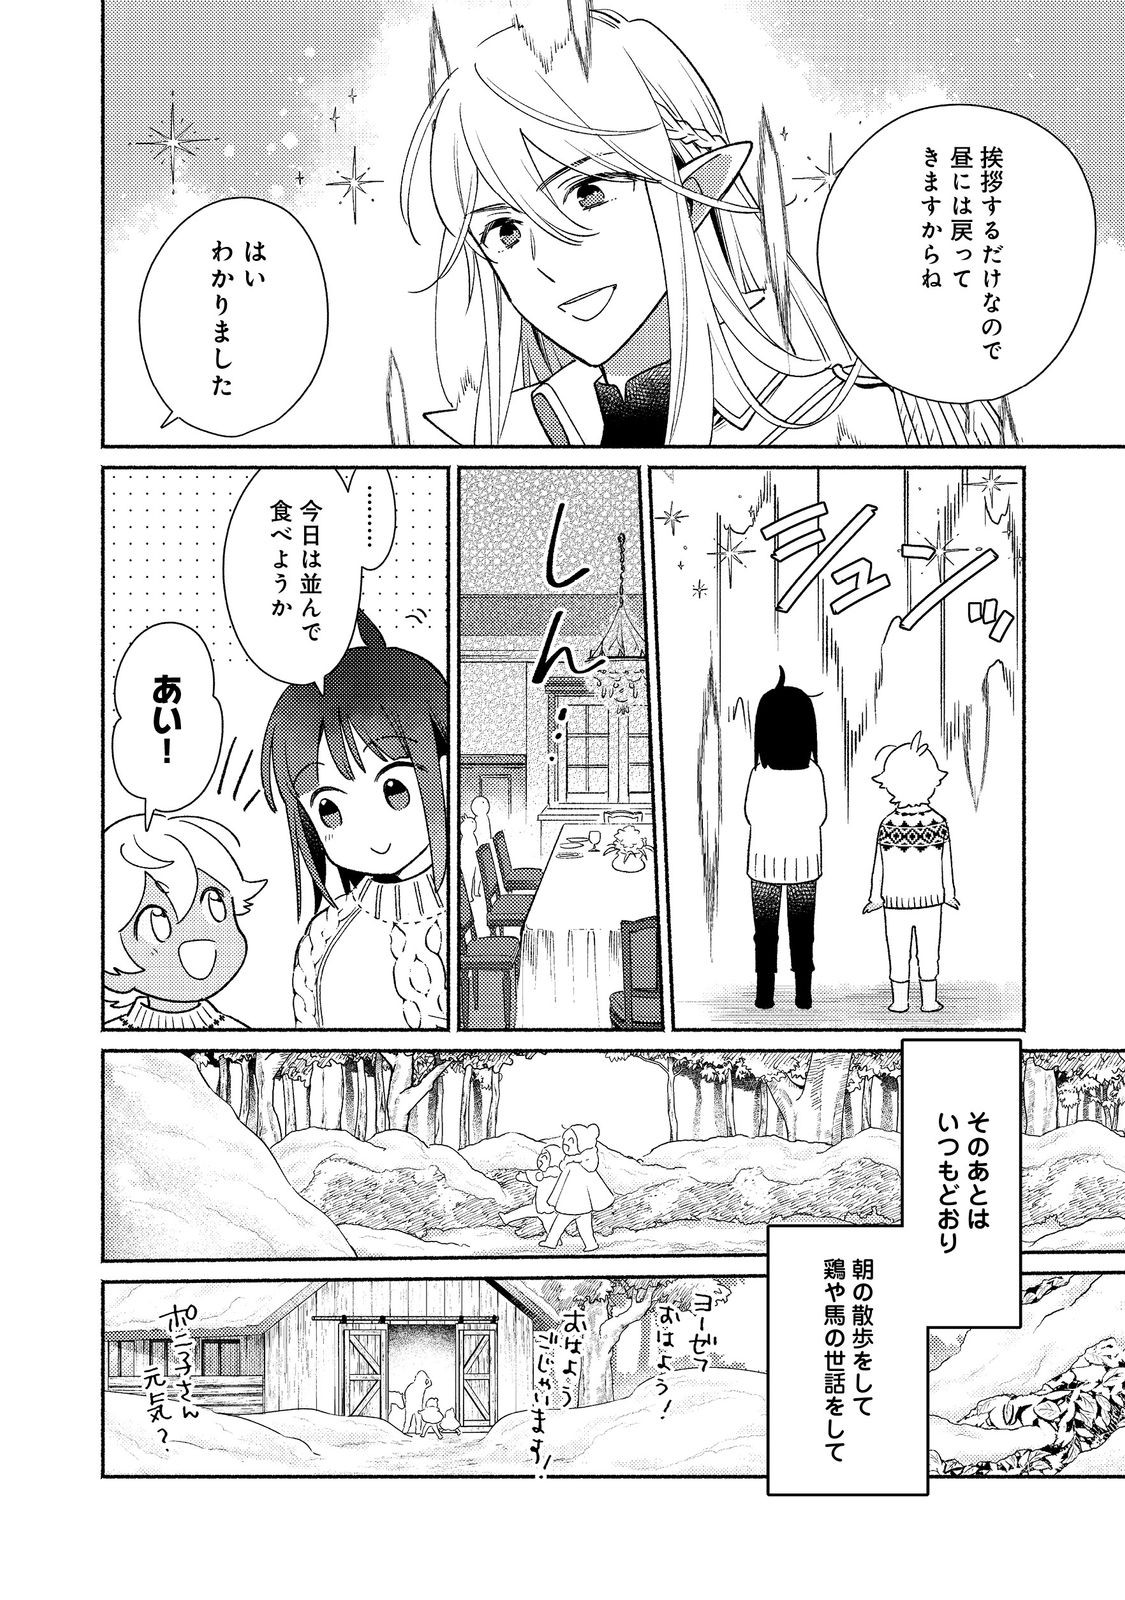 I’m the White Pig Nobleman 第26.1話 - Page 6